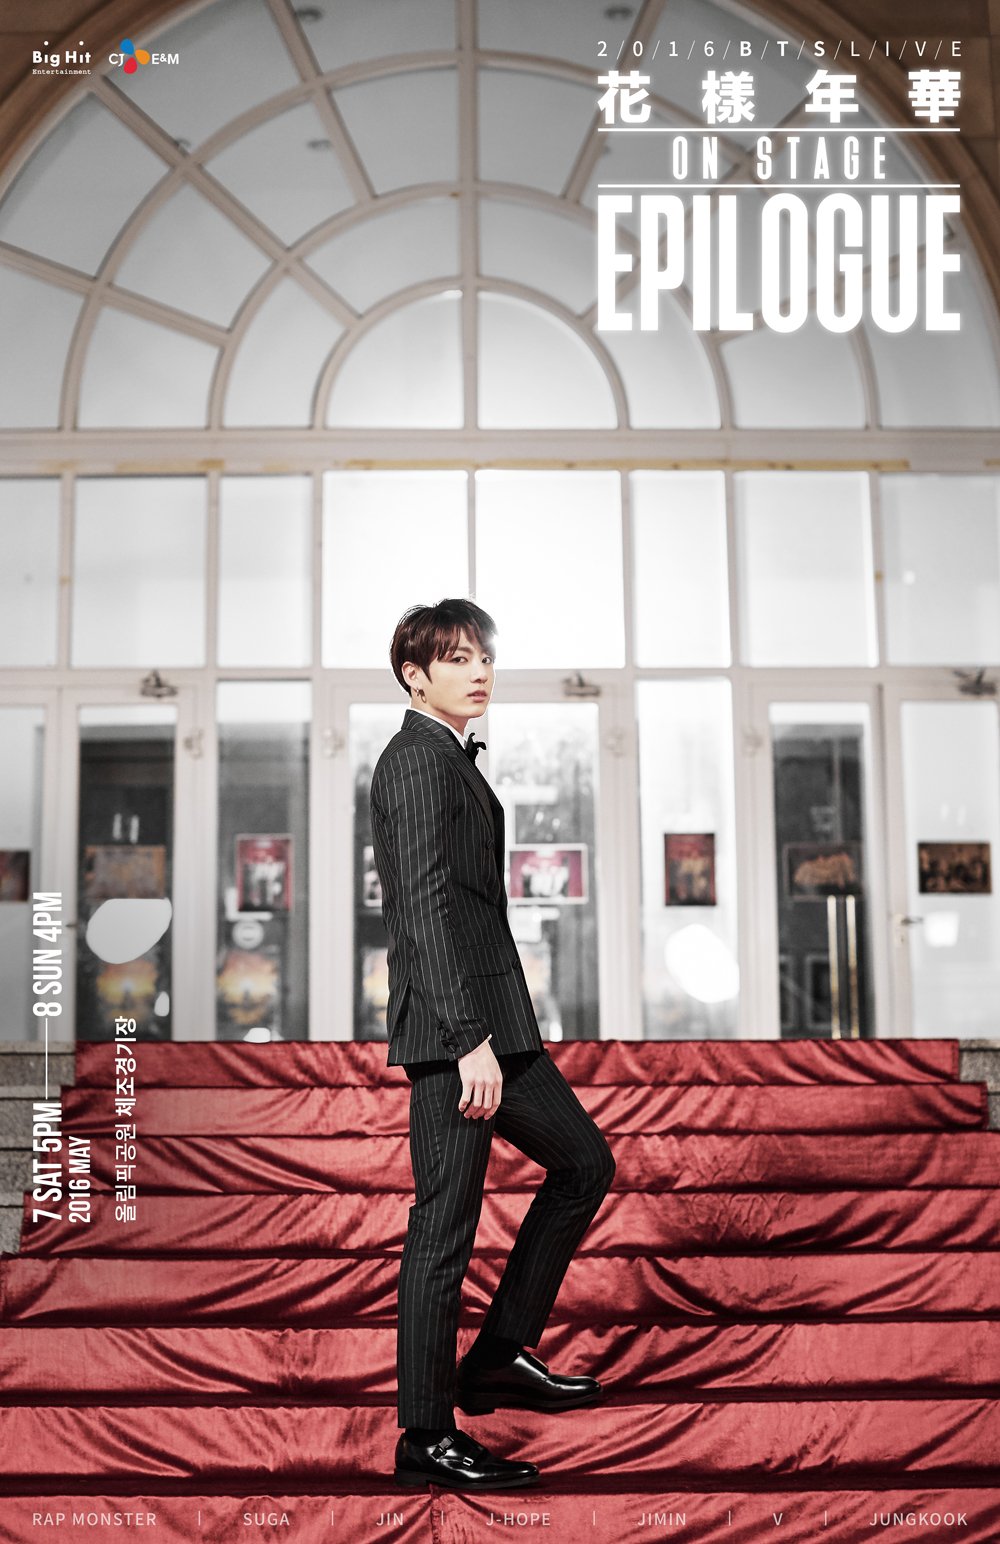 Picture 2016 Bts Live 화양연화 On Stage Epilogue Individual